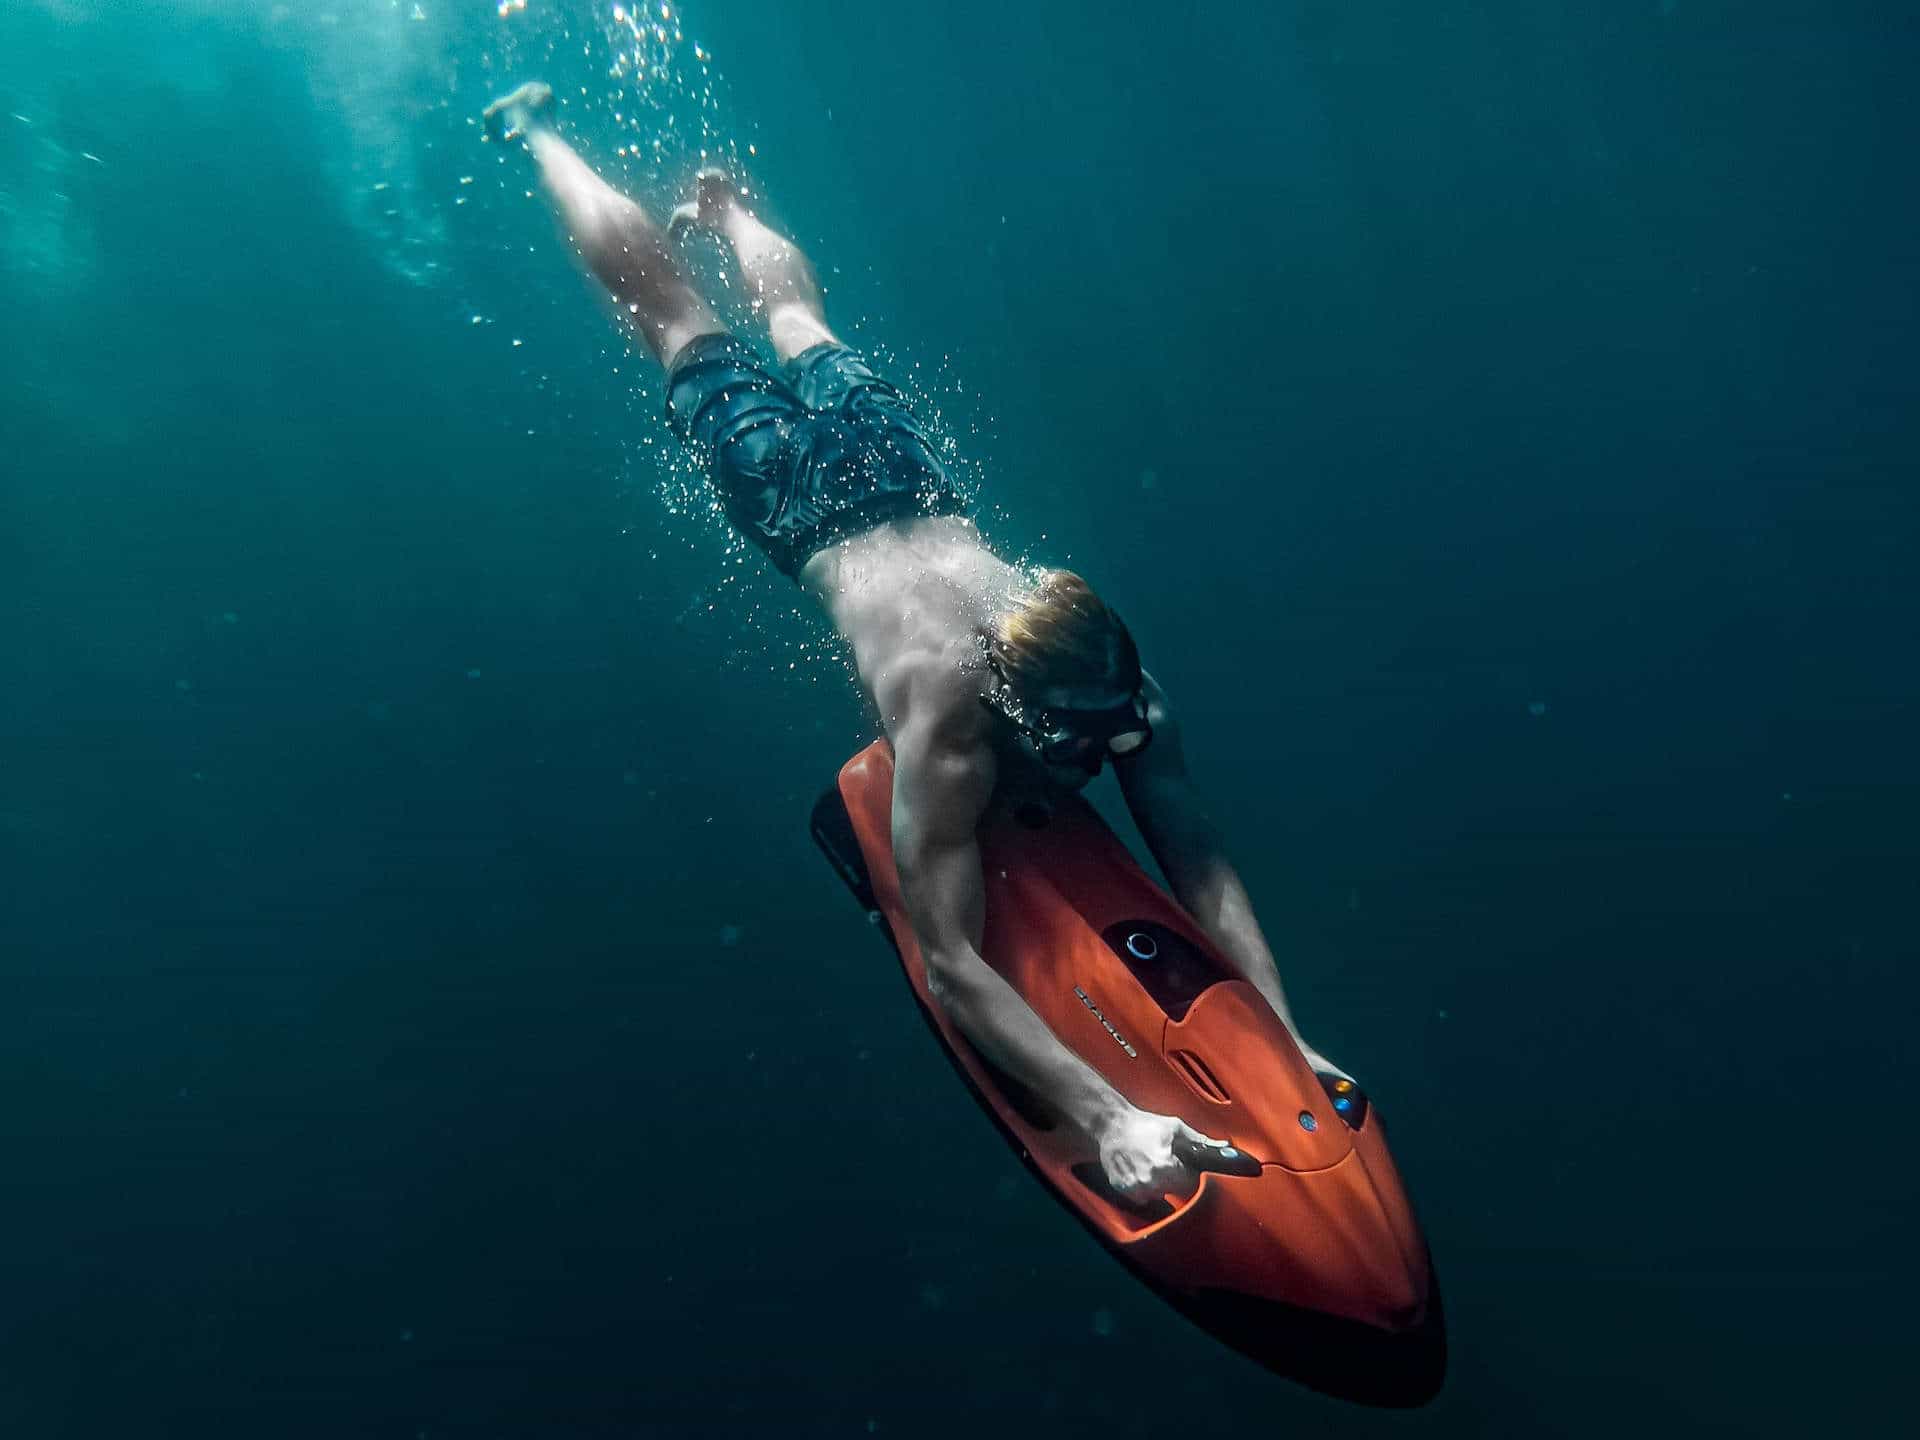 https://www.social-diving.com/wp-content/uploads/freediver-red-underwater-scooter-diving.jpg